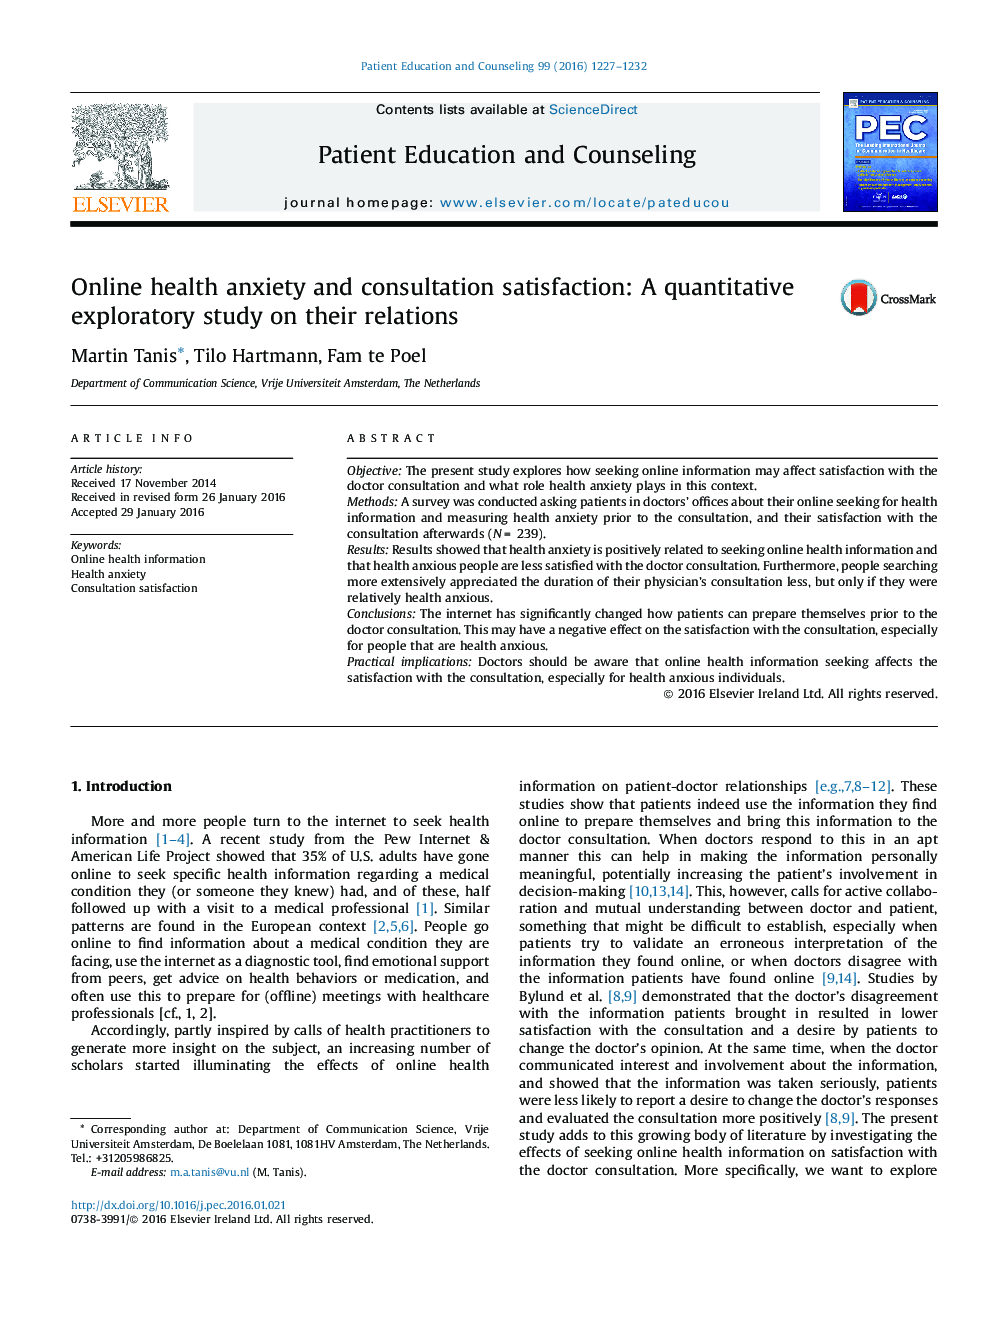 Online health anxiety and consultation satisfaction: A quantitative exploratory study on their relations